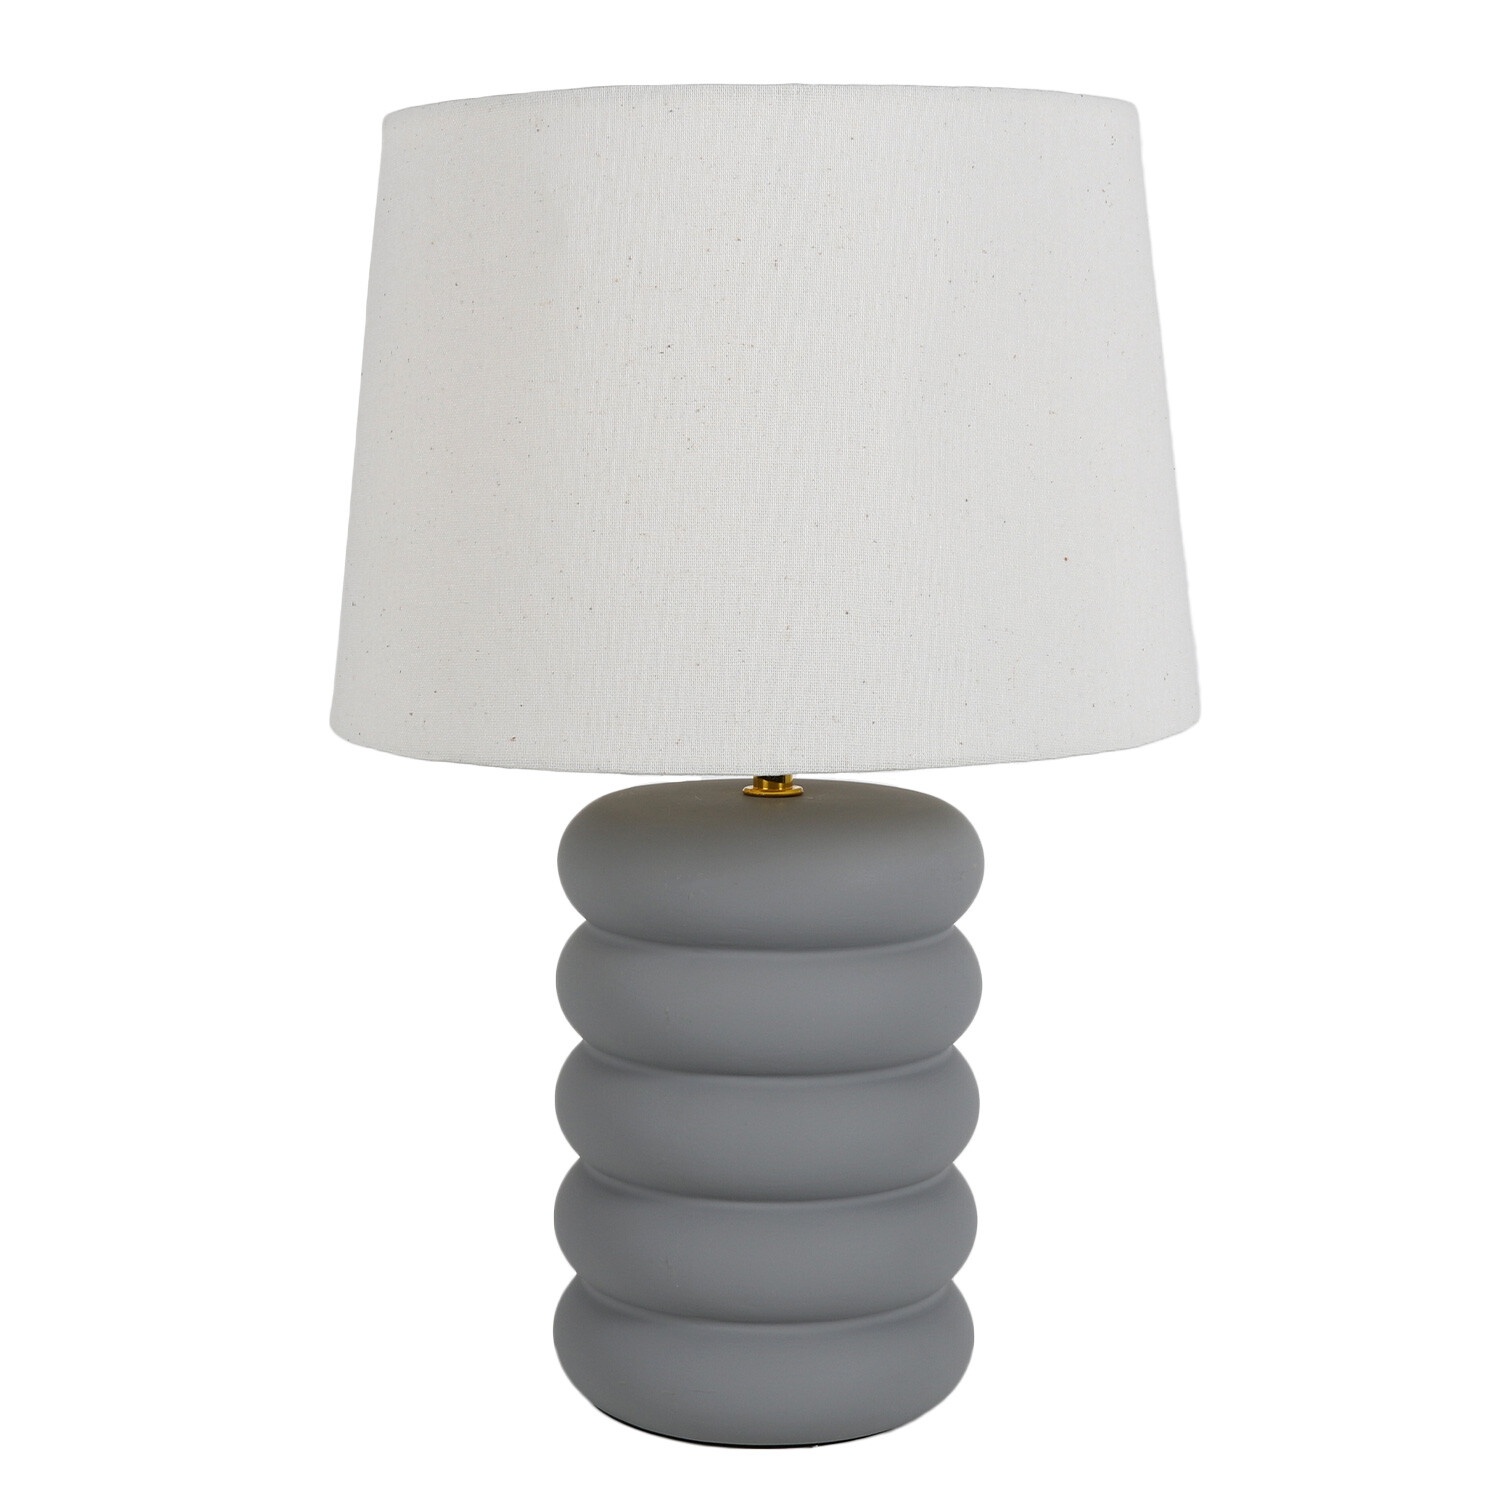 Single Isobel Cylindrical Table Lamp in Assorted styles Image 5